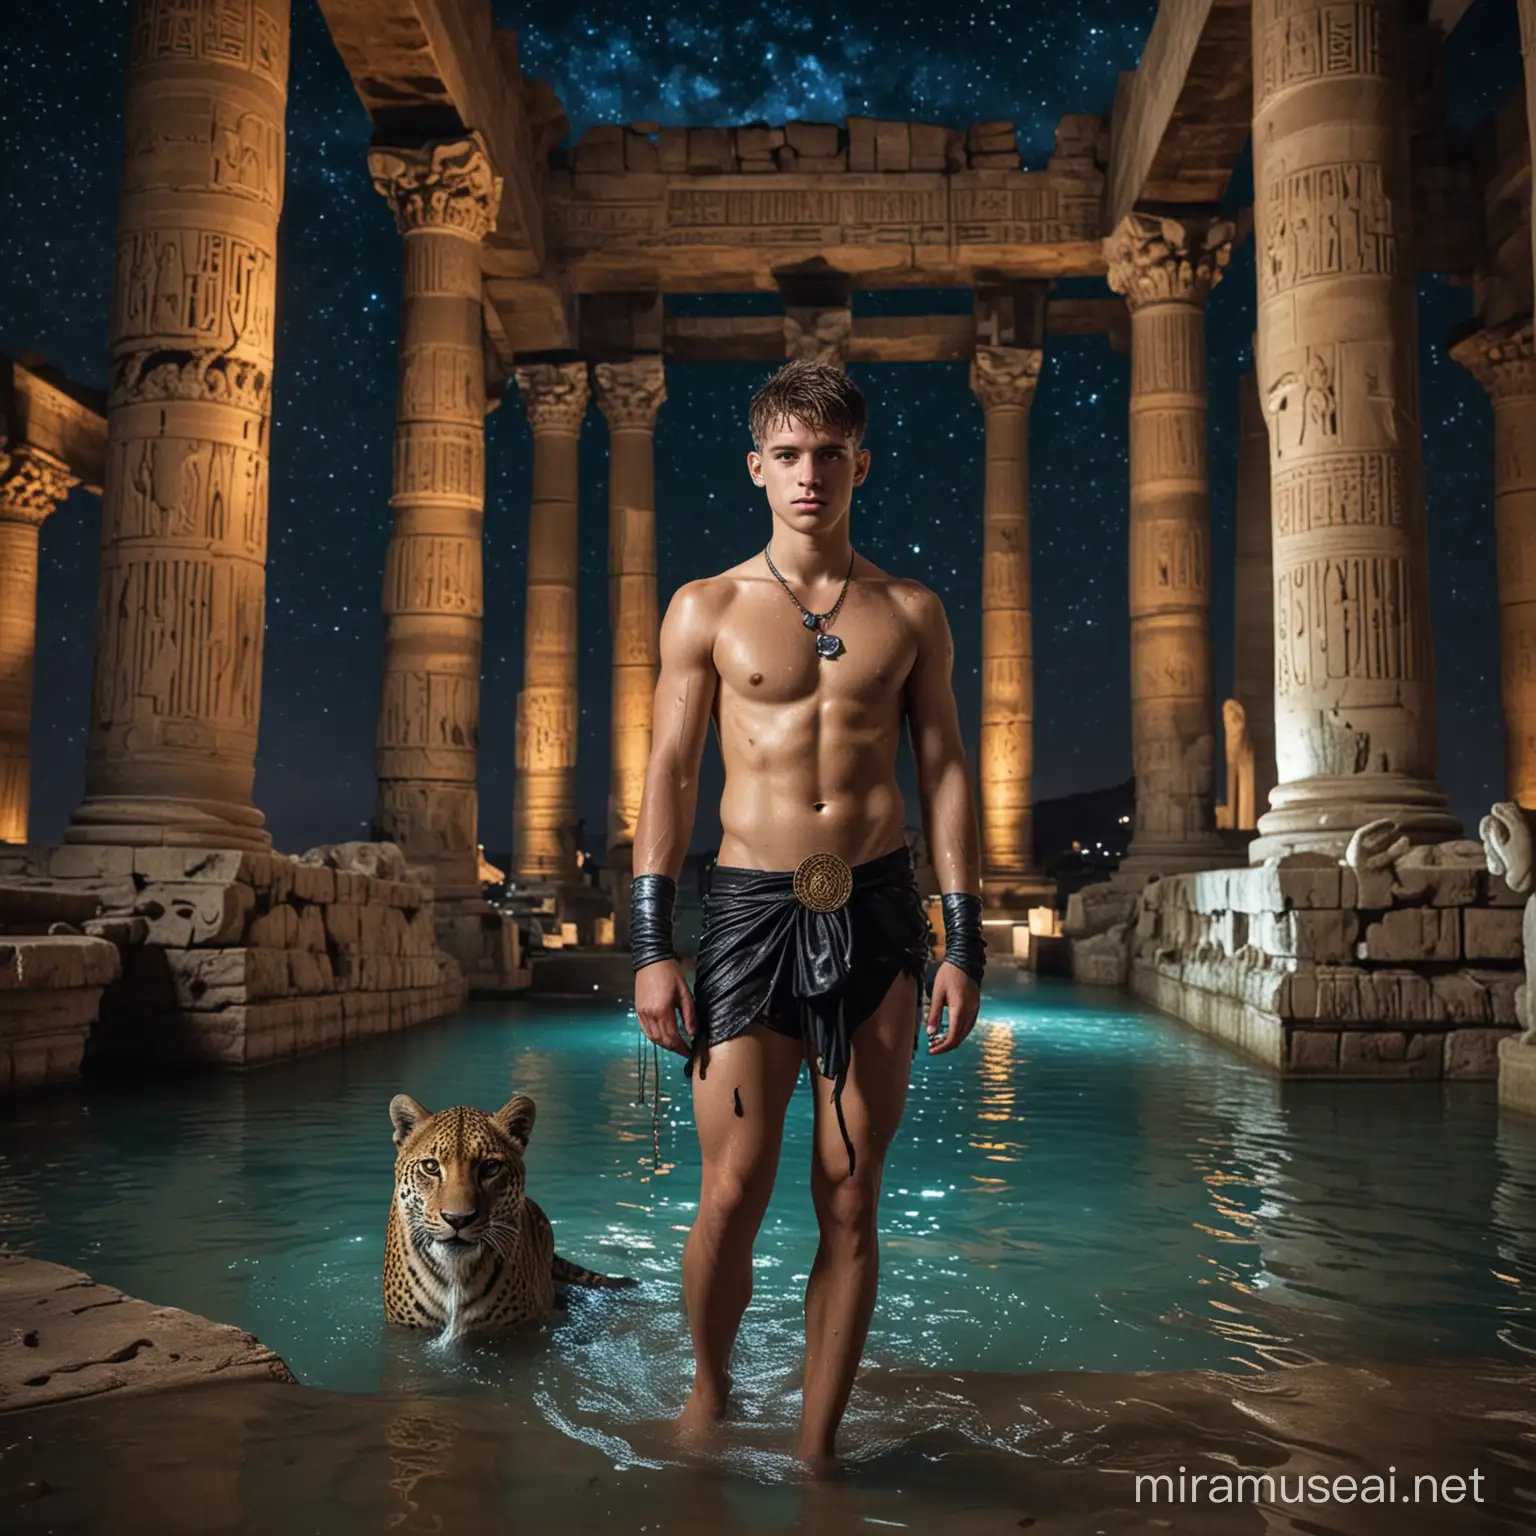 Sweaty wet, very muscled, young teen boy, undercut hairdress,  with his feet in the water of an oasis. Dressed as a roman soldier shirtless. In front of the statue of Bastet with two leopards at the feet of the statue in the ruins of a egyptian temple. At night. The sky is full of stars with a huge galaxy. Blue neon colors ambient.